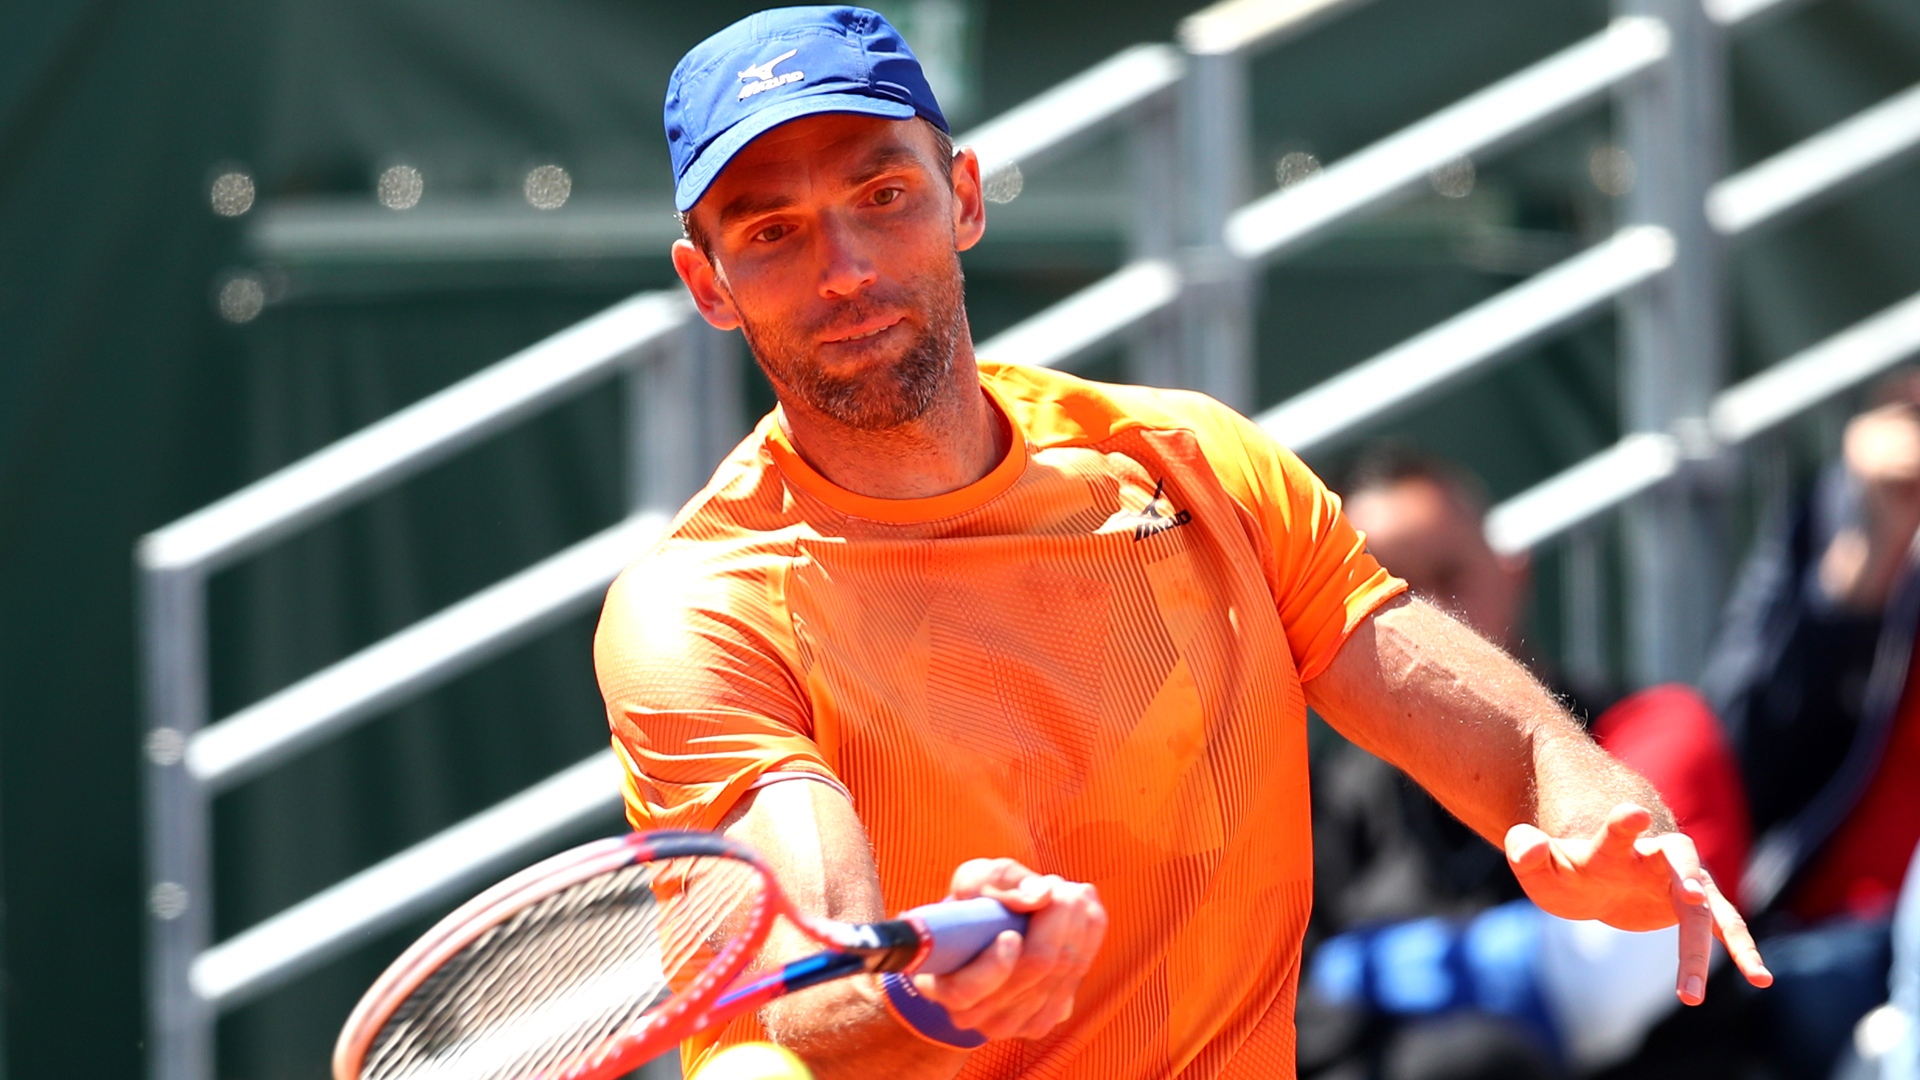 Ivo Karlovic, the 2016 winner, was unable to get through his opener at the Hall of Fame Tennis Championships.